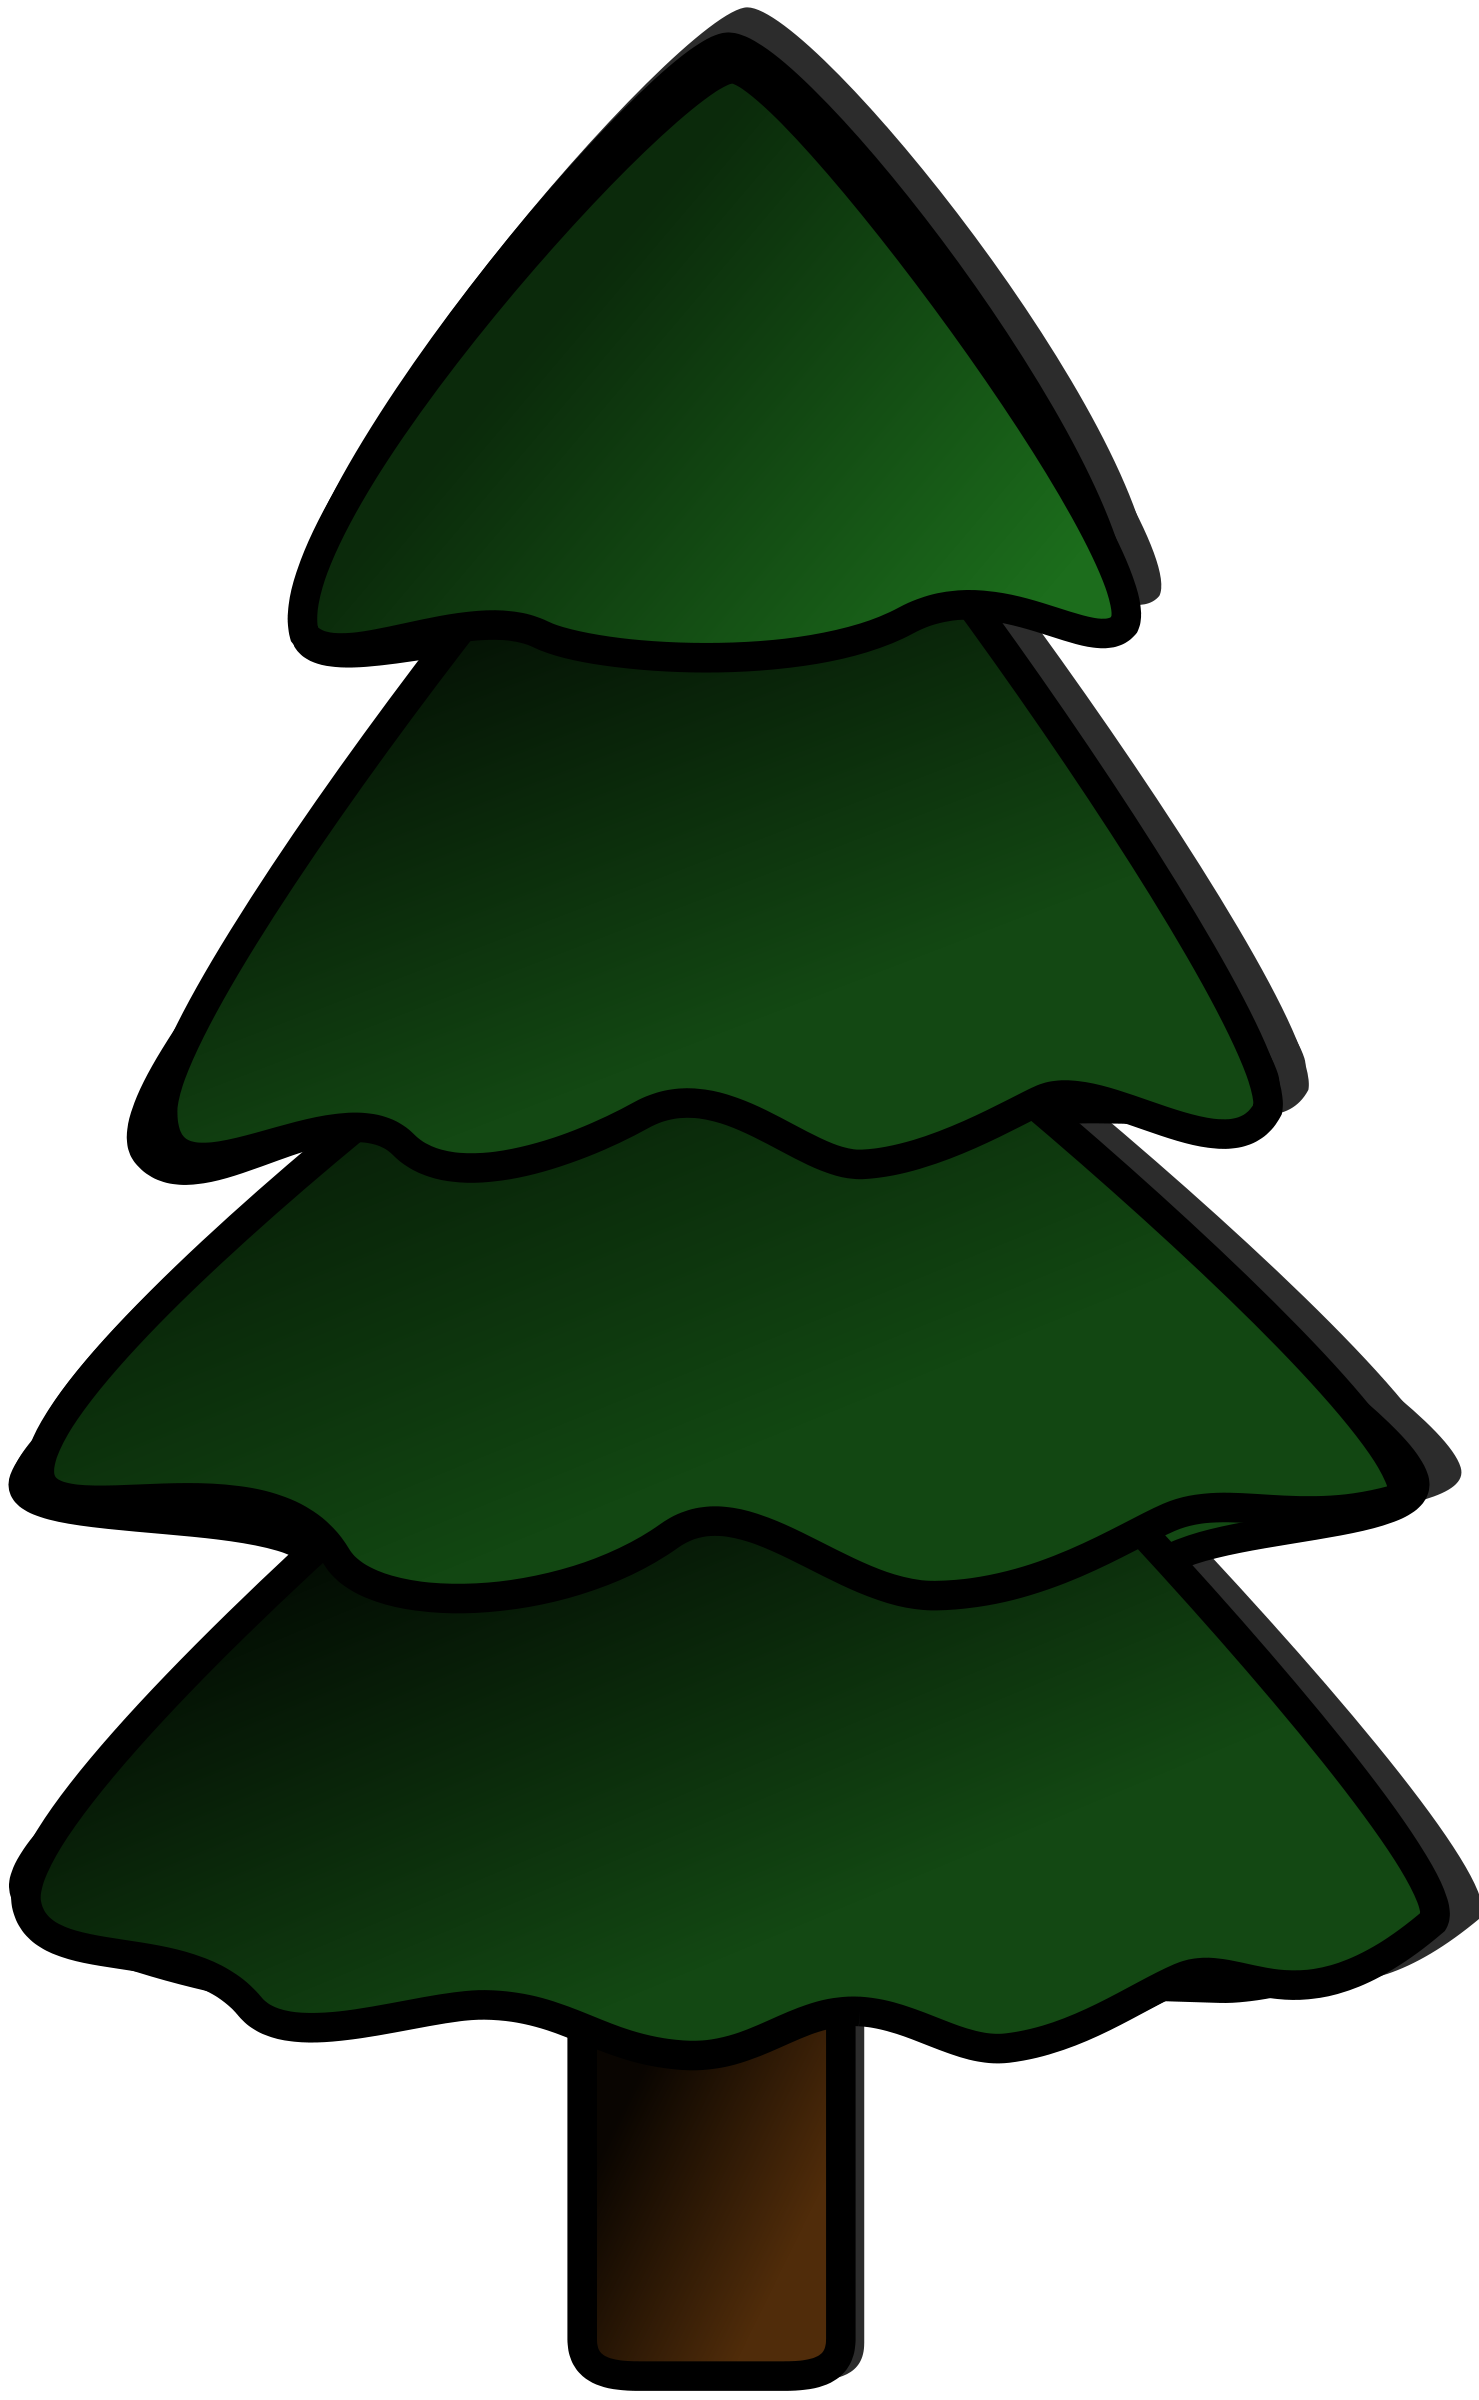 Pine Tree Clipart | Clipart Panda - Free Clipart Images